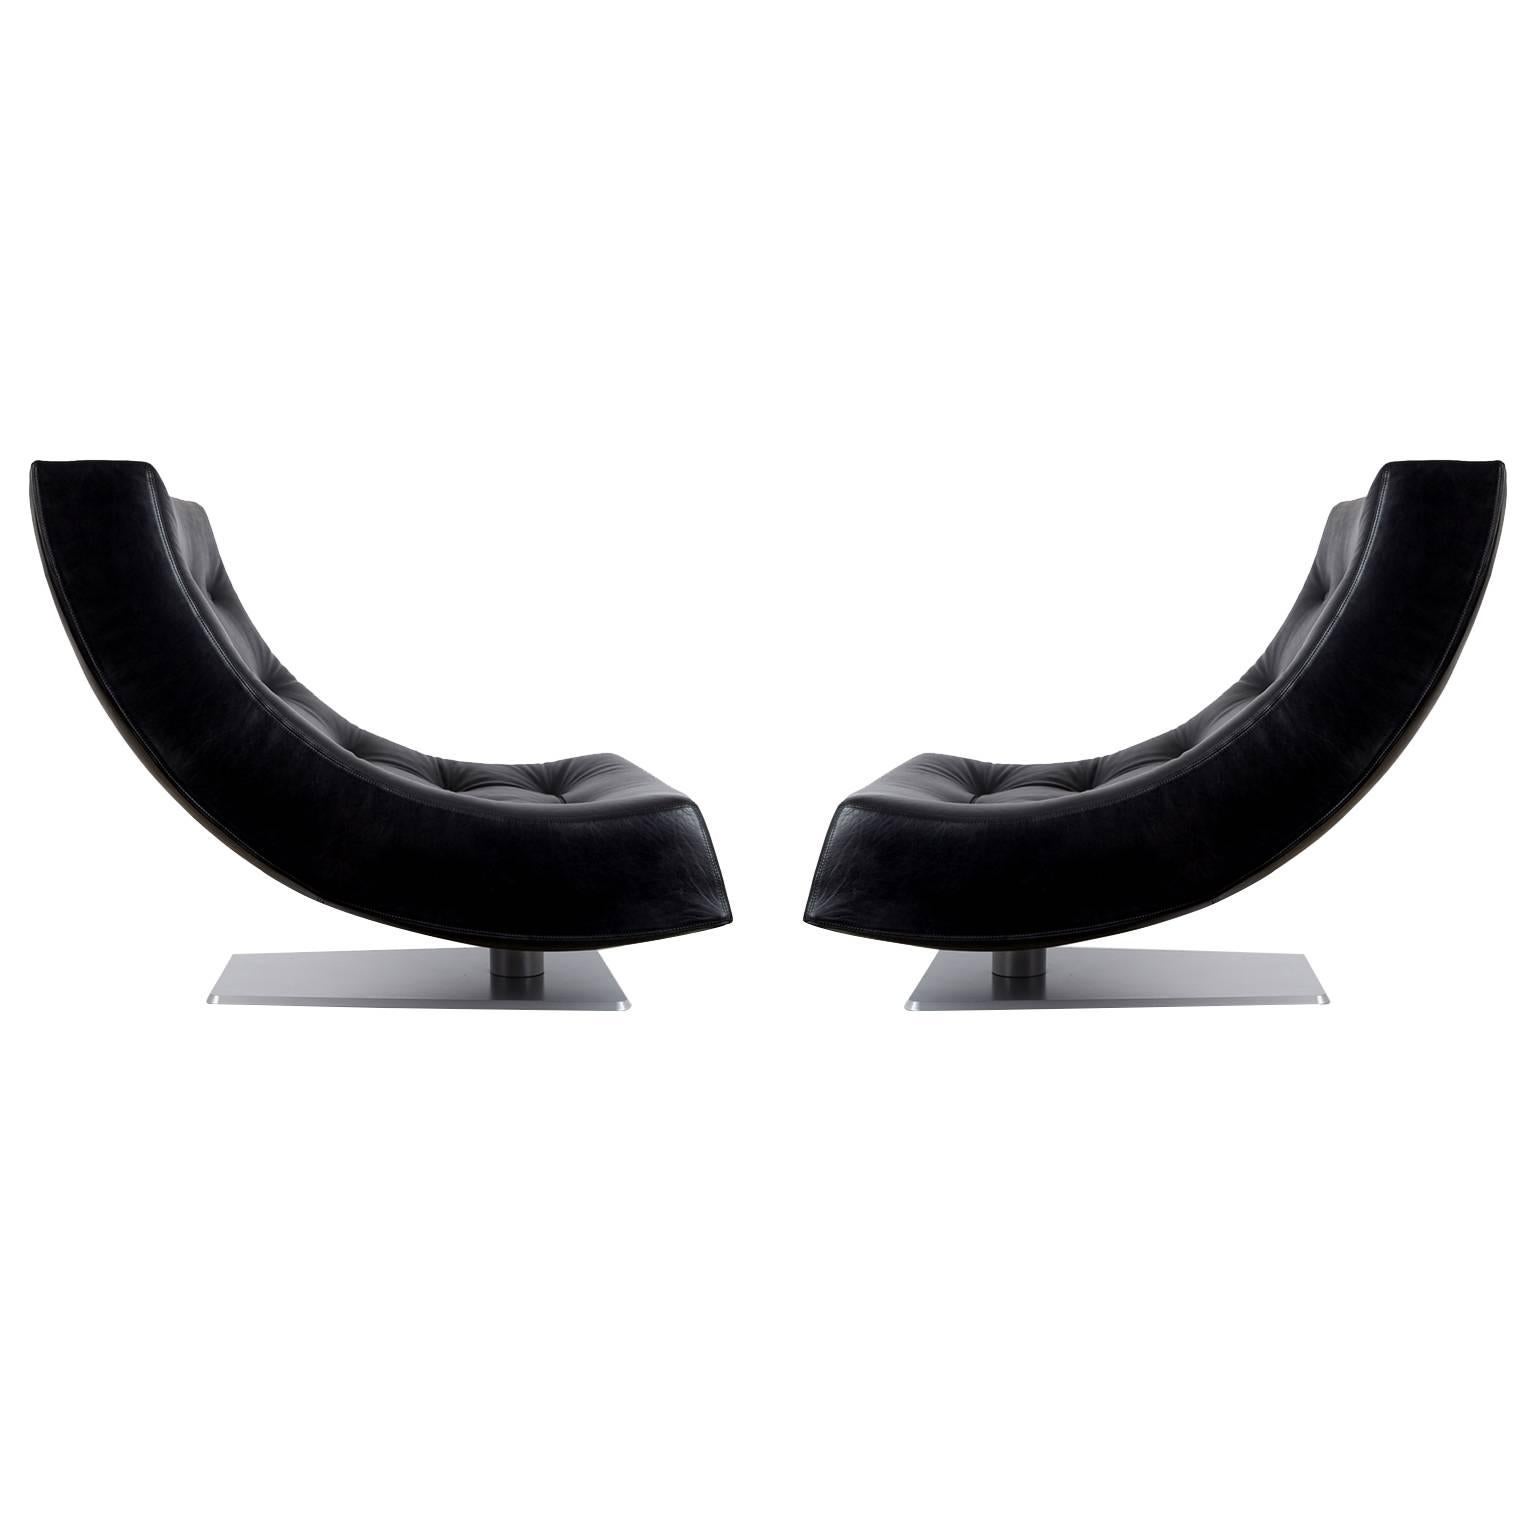 Large Modern Tufted Black Leather Swivel Scoop Lounge Chairs, Pair, circa 1980